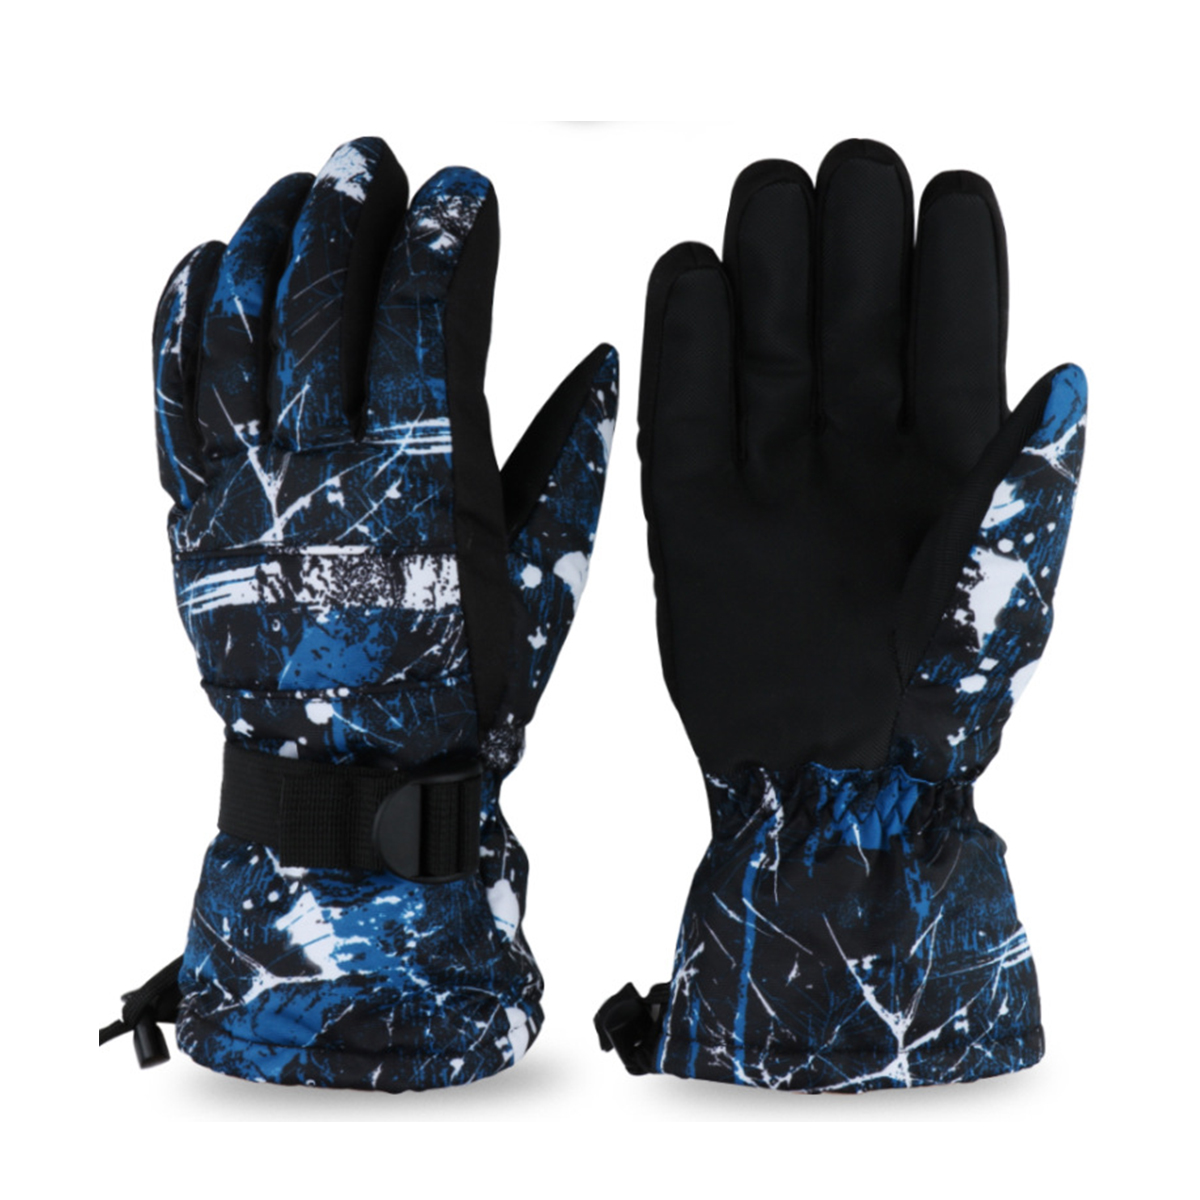 Woman-and-Man-Waterproof-Flannel-Skiing-Gloves-Outdoor-Camping-Hiking-Climbing-Winter-Warm-Gloves-Sp-1603717-6